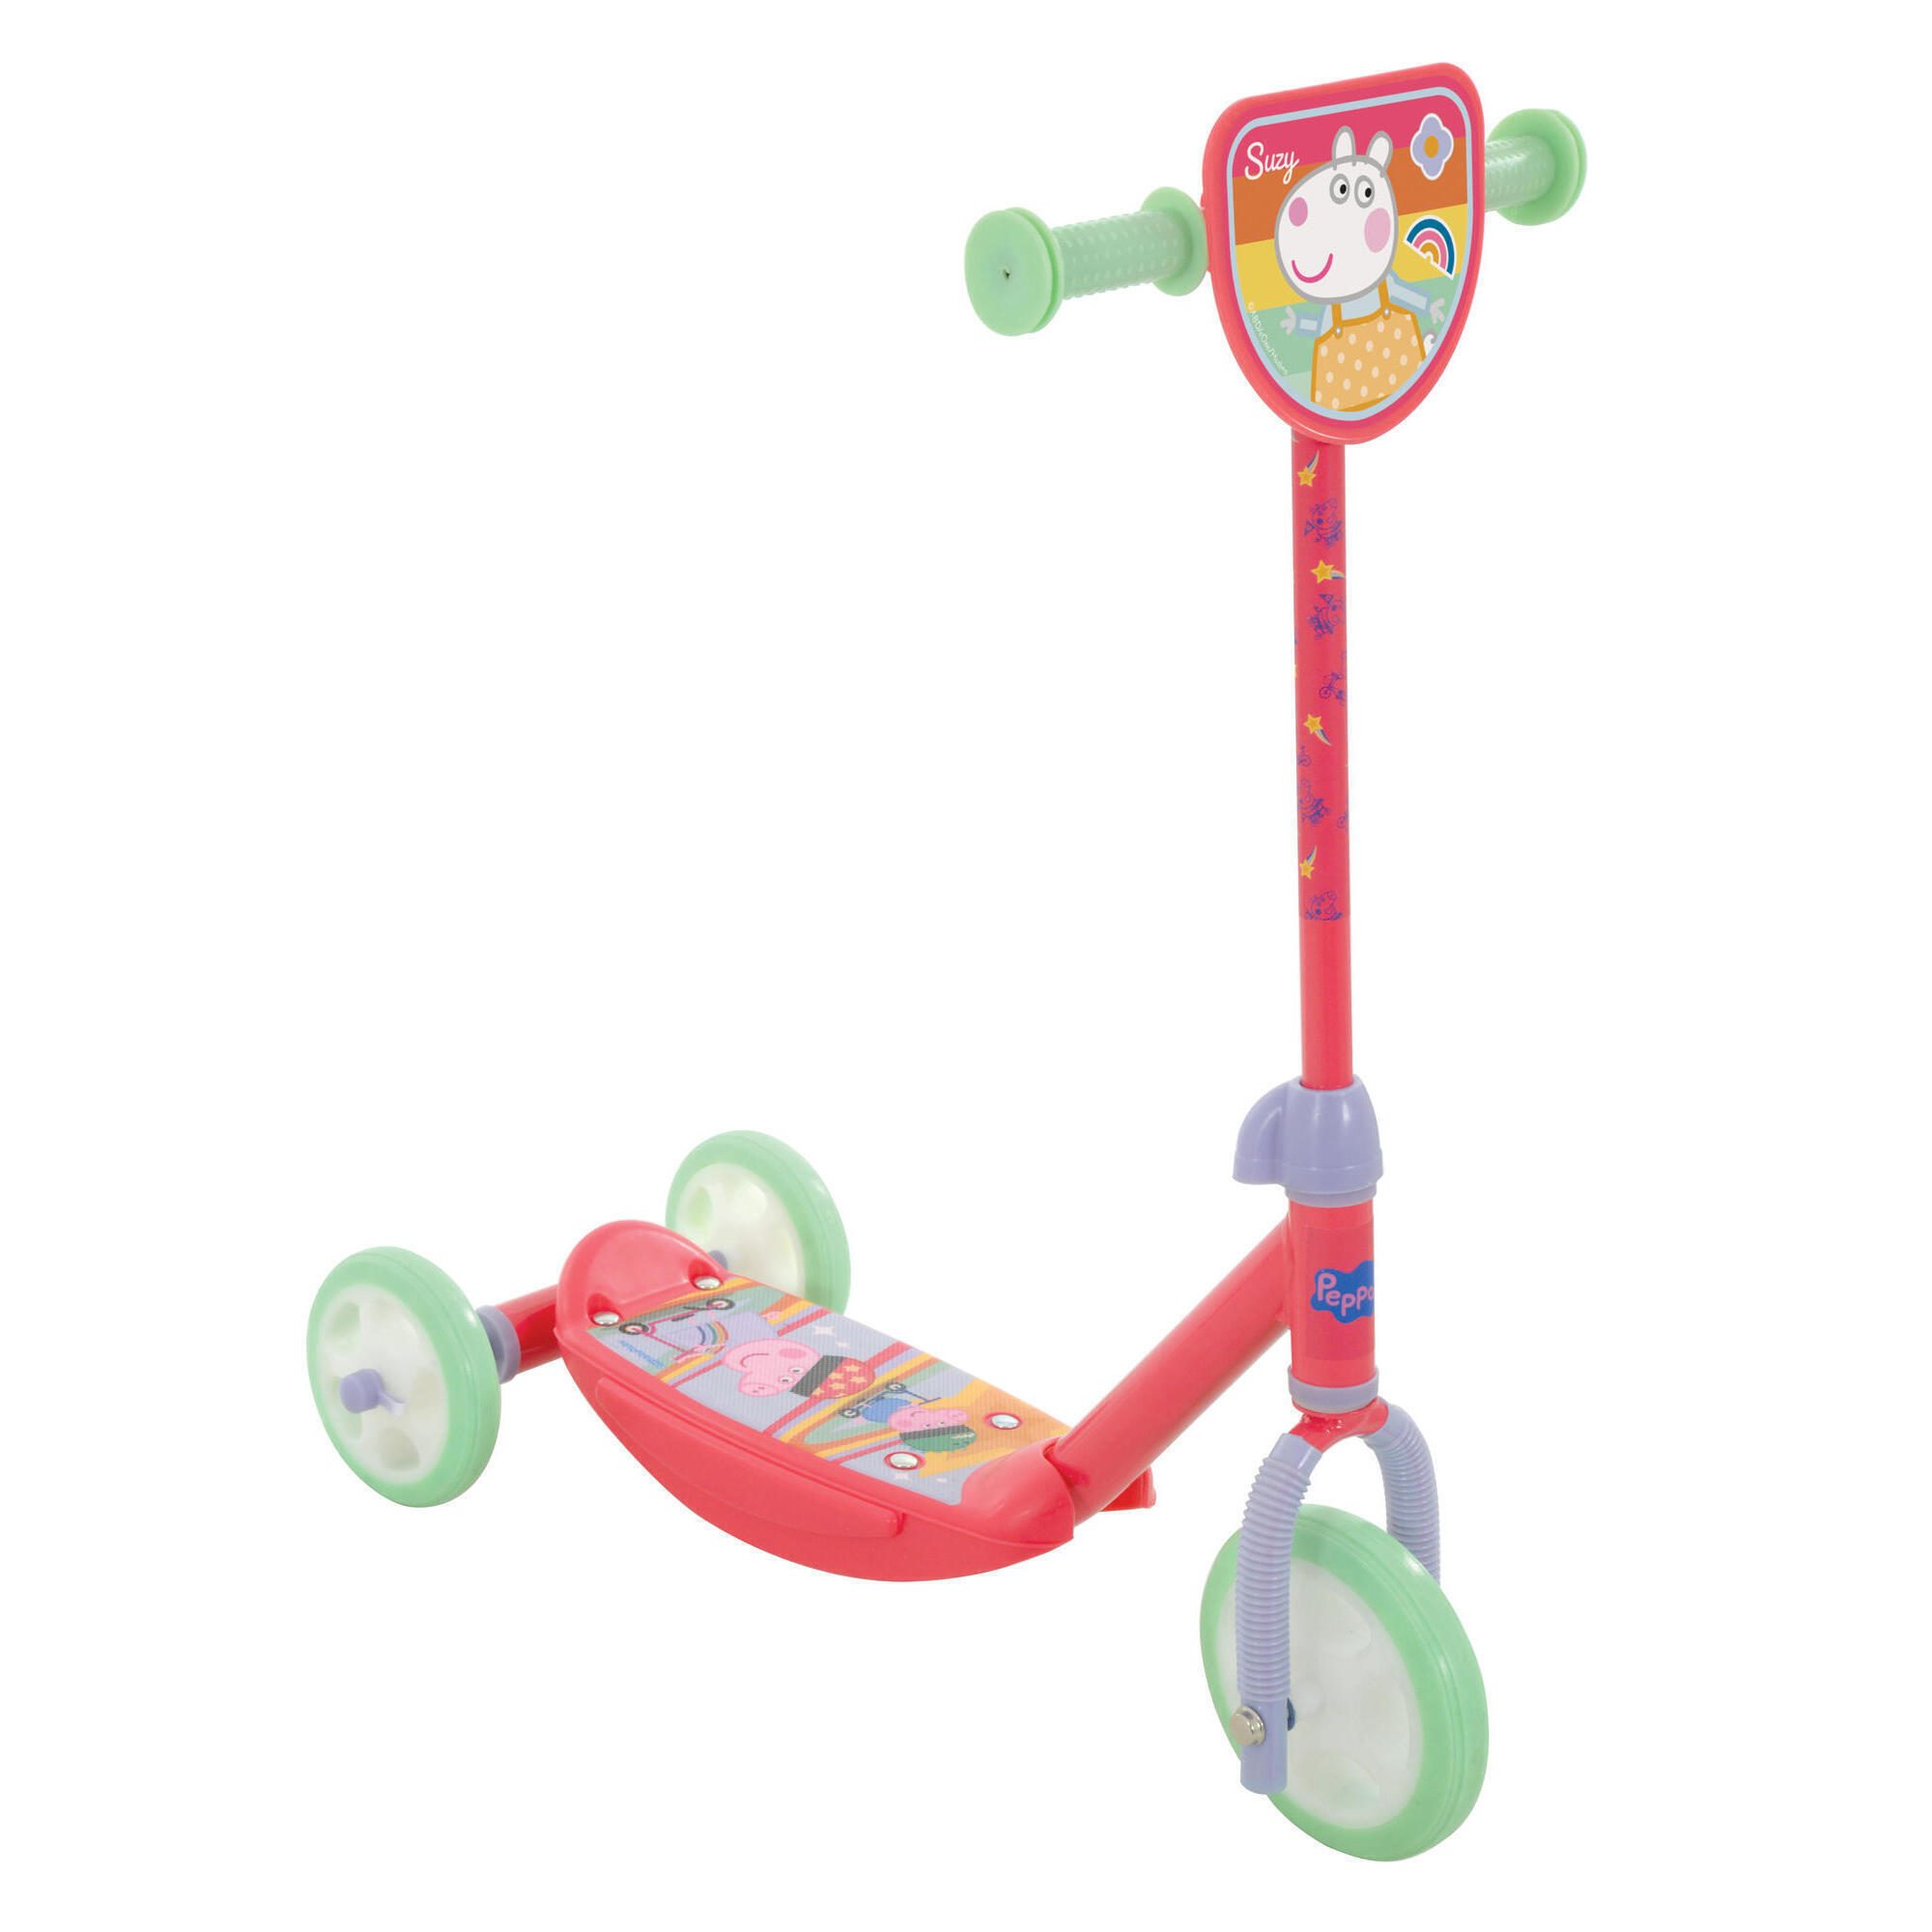 PEPPA PIG Peppa Pig Switch It Multi Character Tri-Scooter